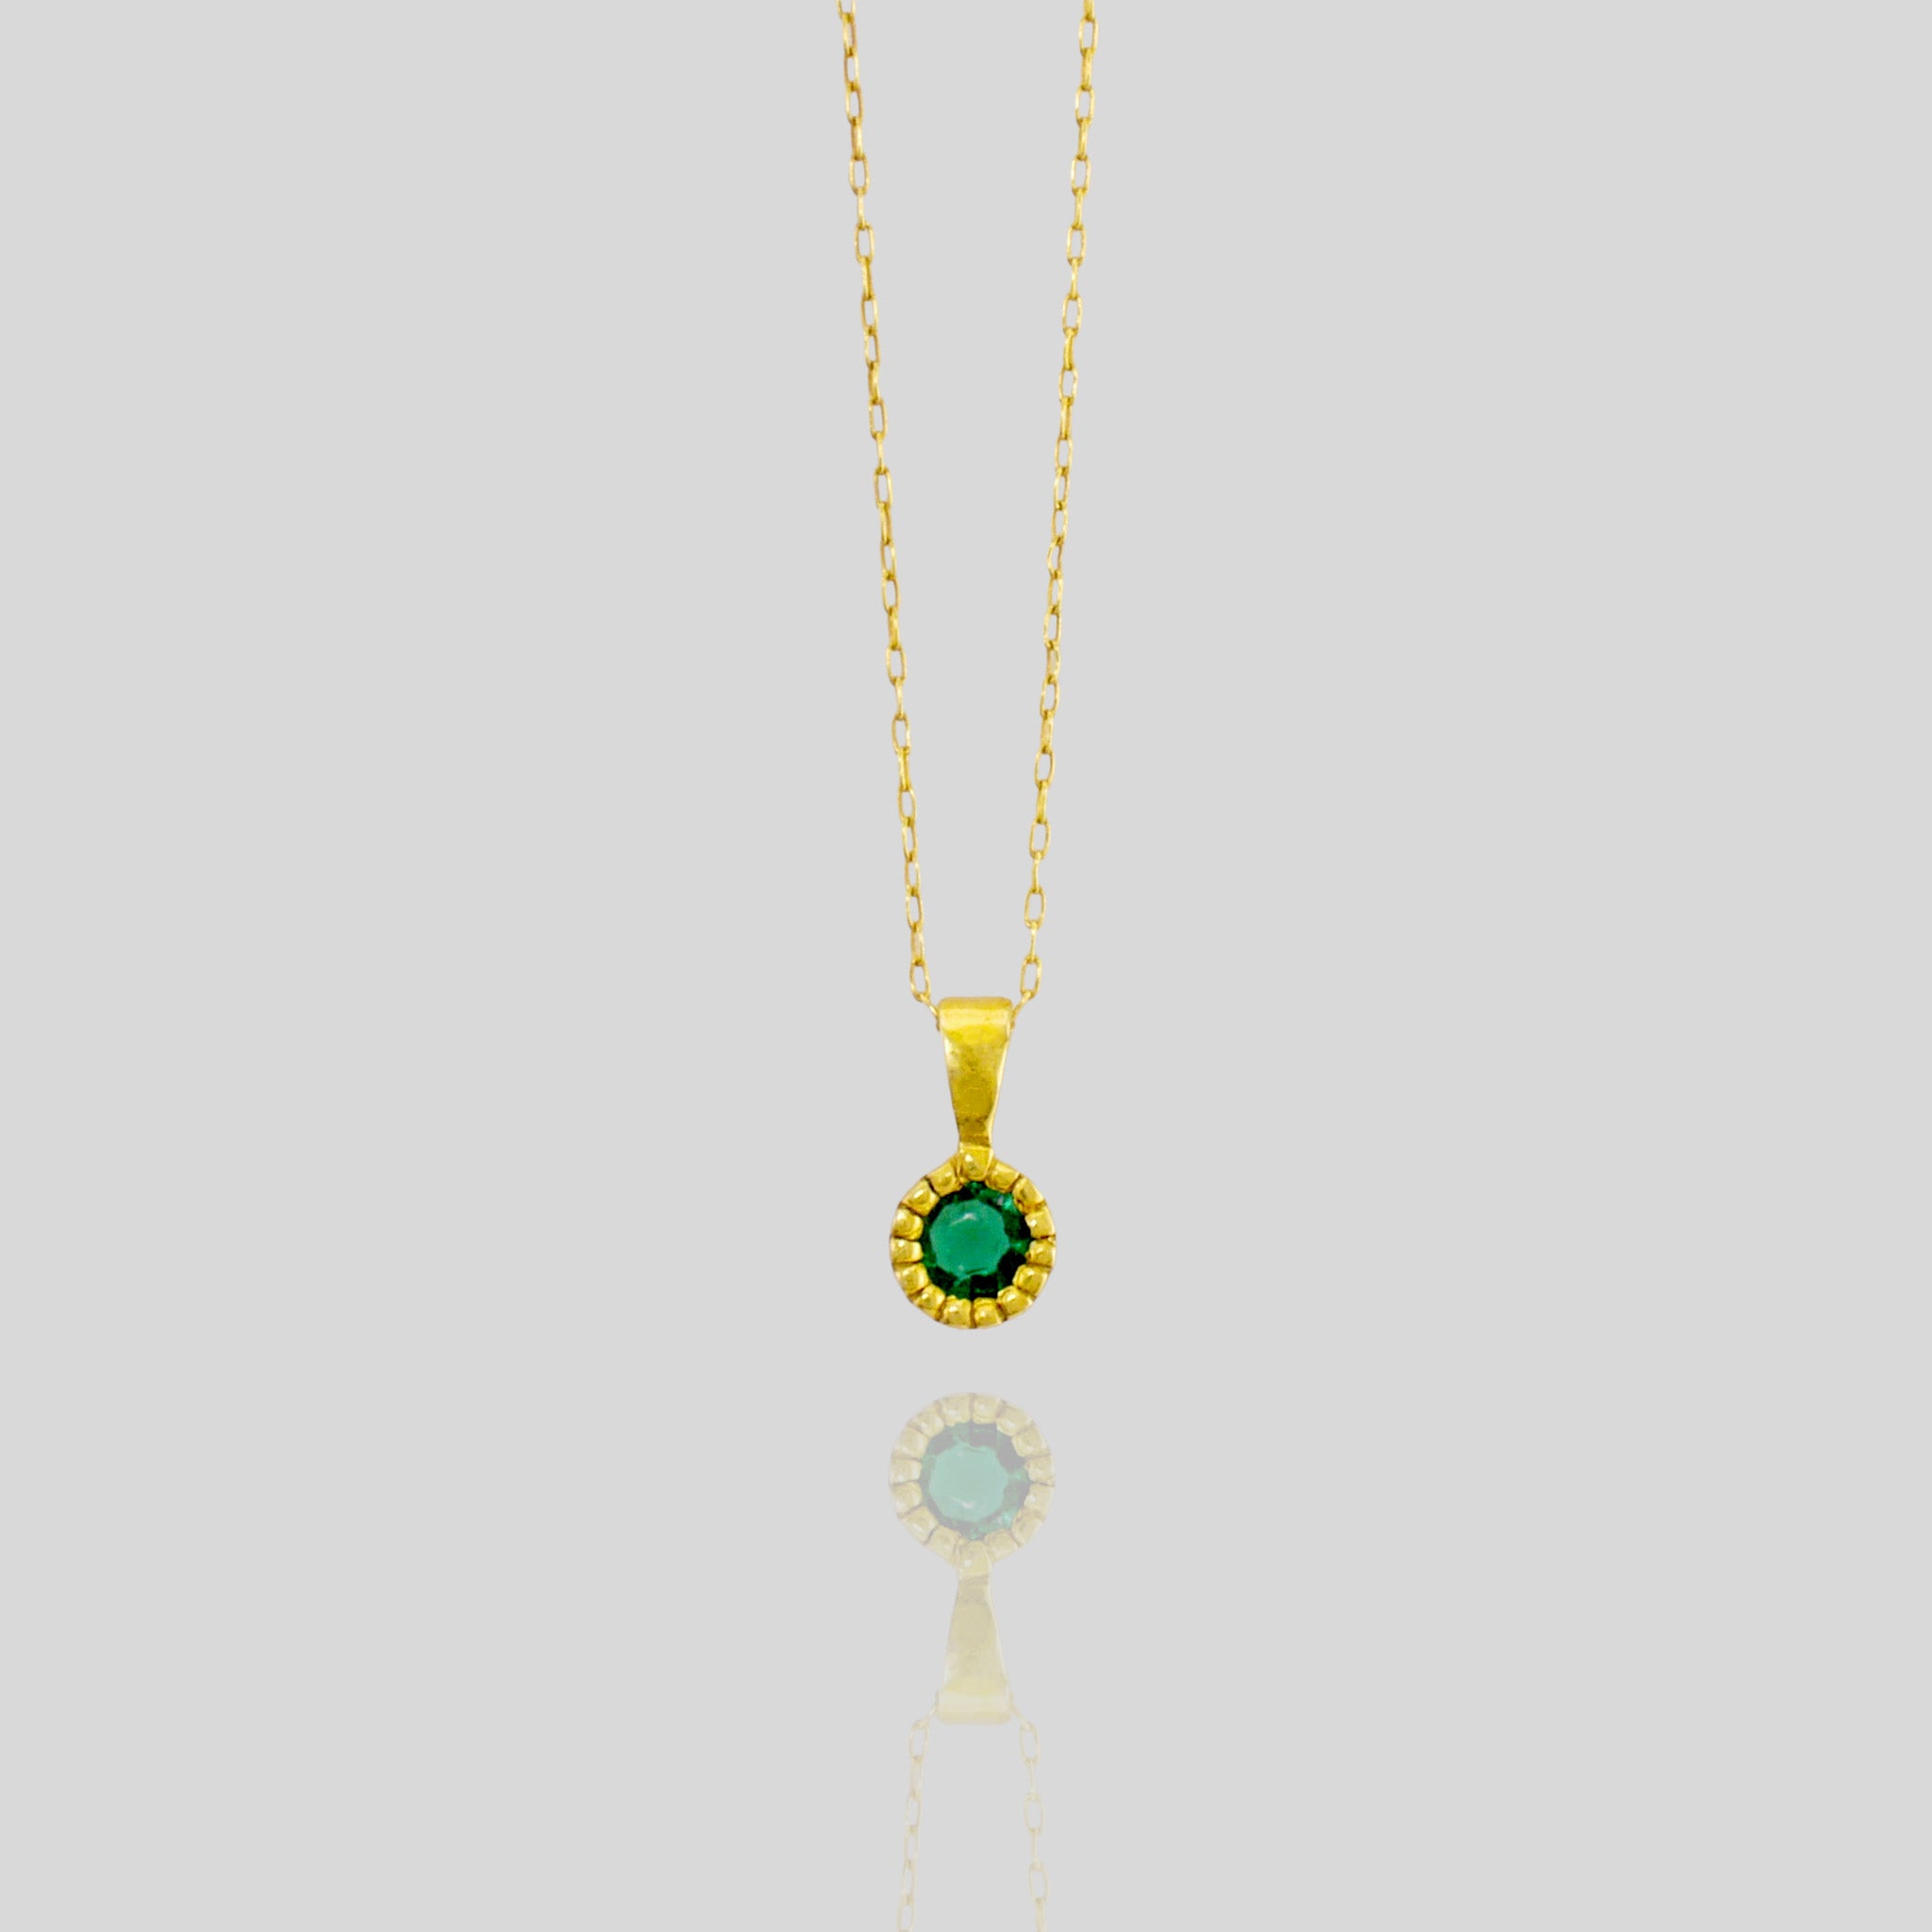 Close up of an Elegant round gold pendant with embroidered texture and central Emerald, exuding classic sophistication.